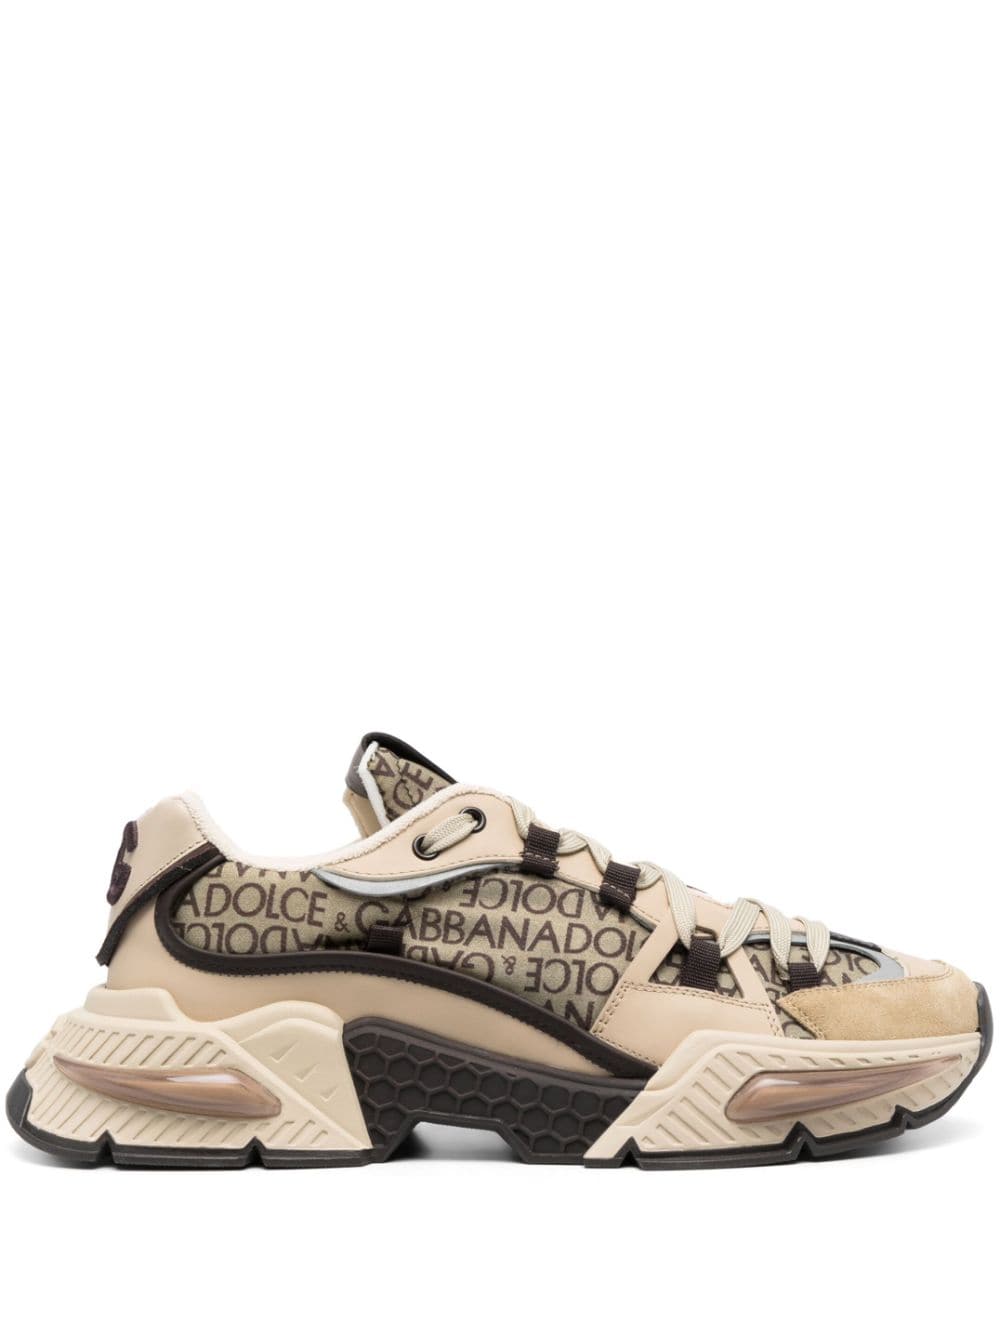 Dolce & Gabbana, Airmaster Panelled Low Top Sneakers